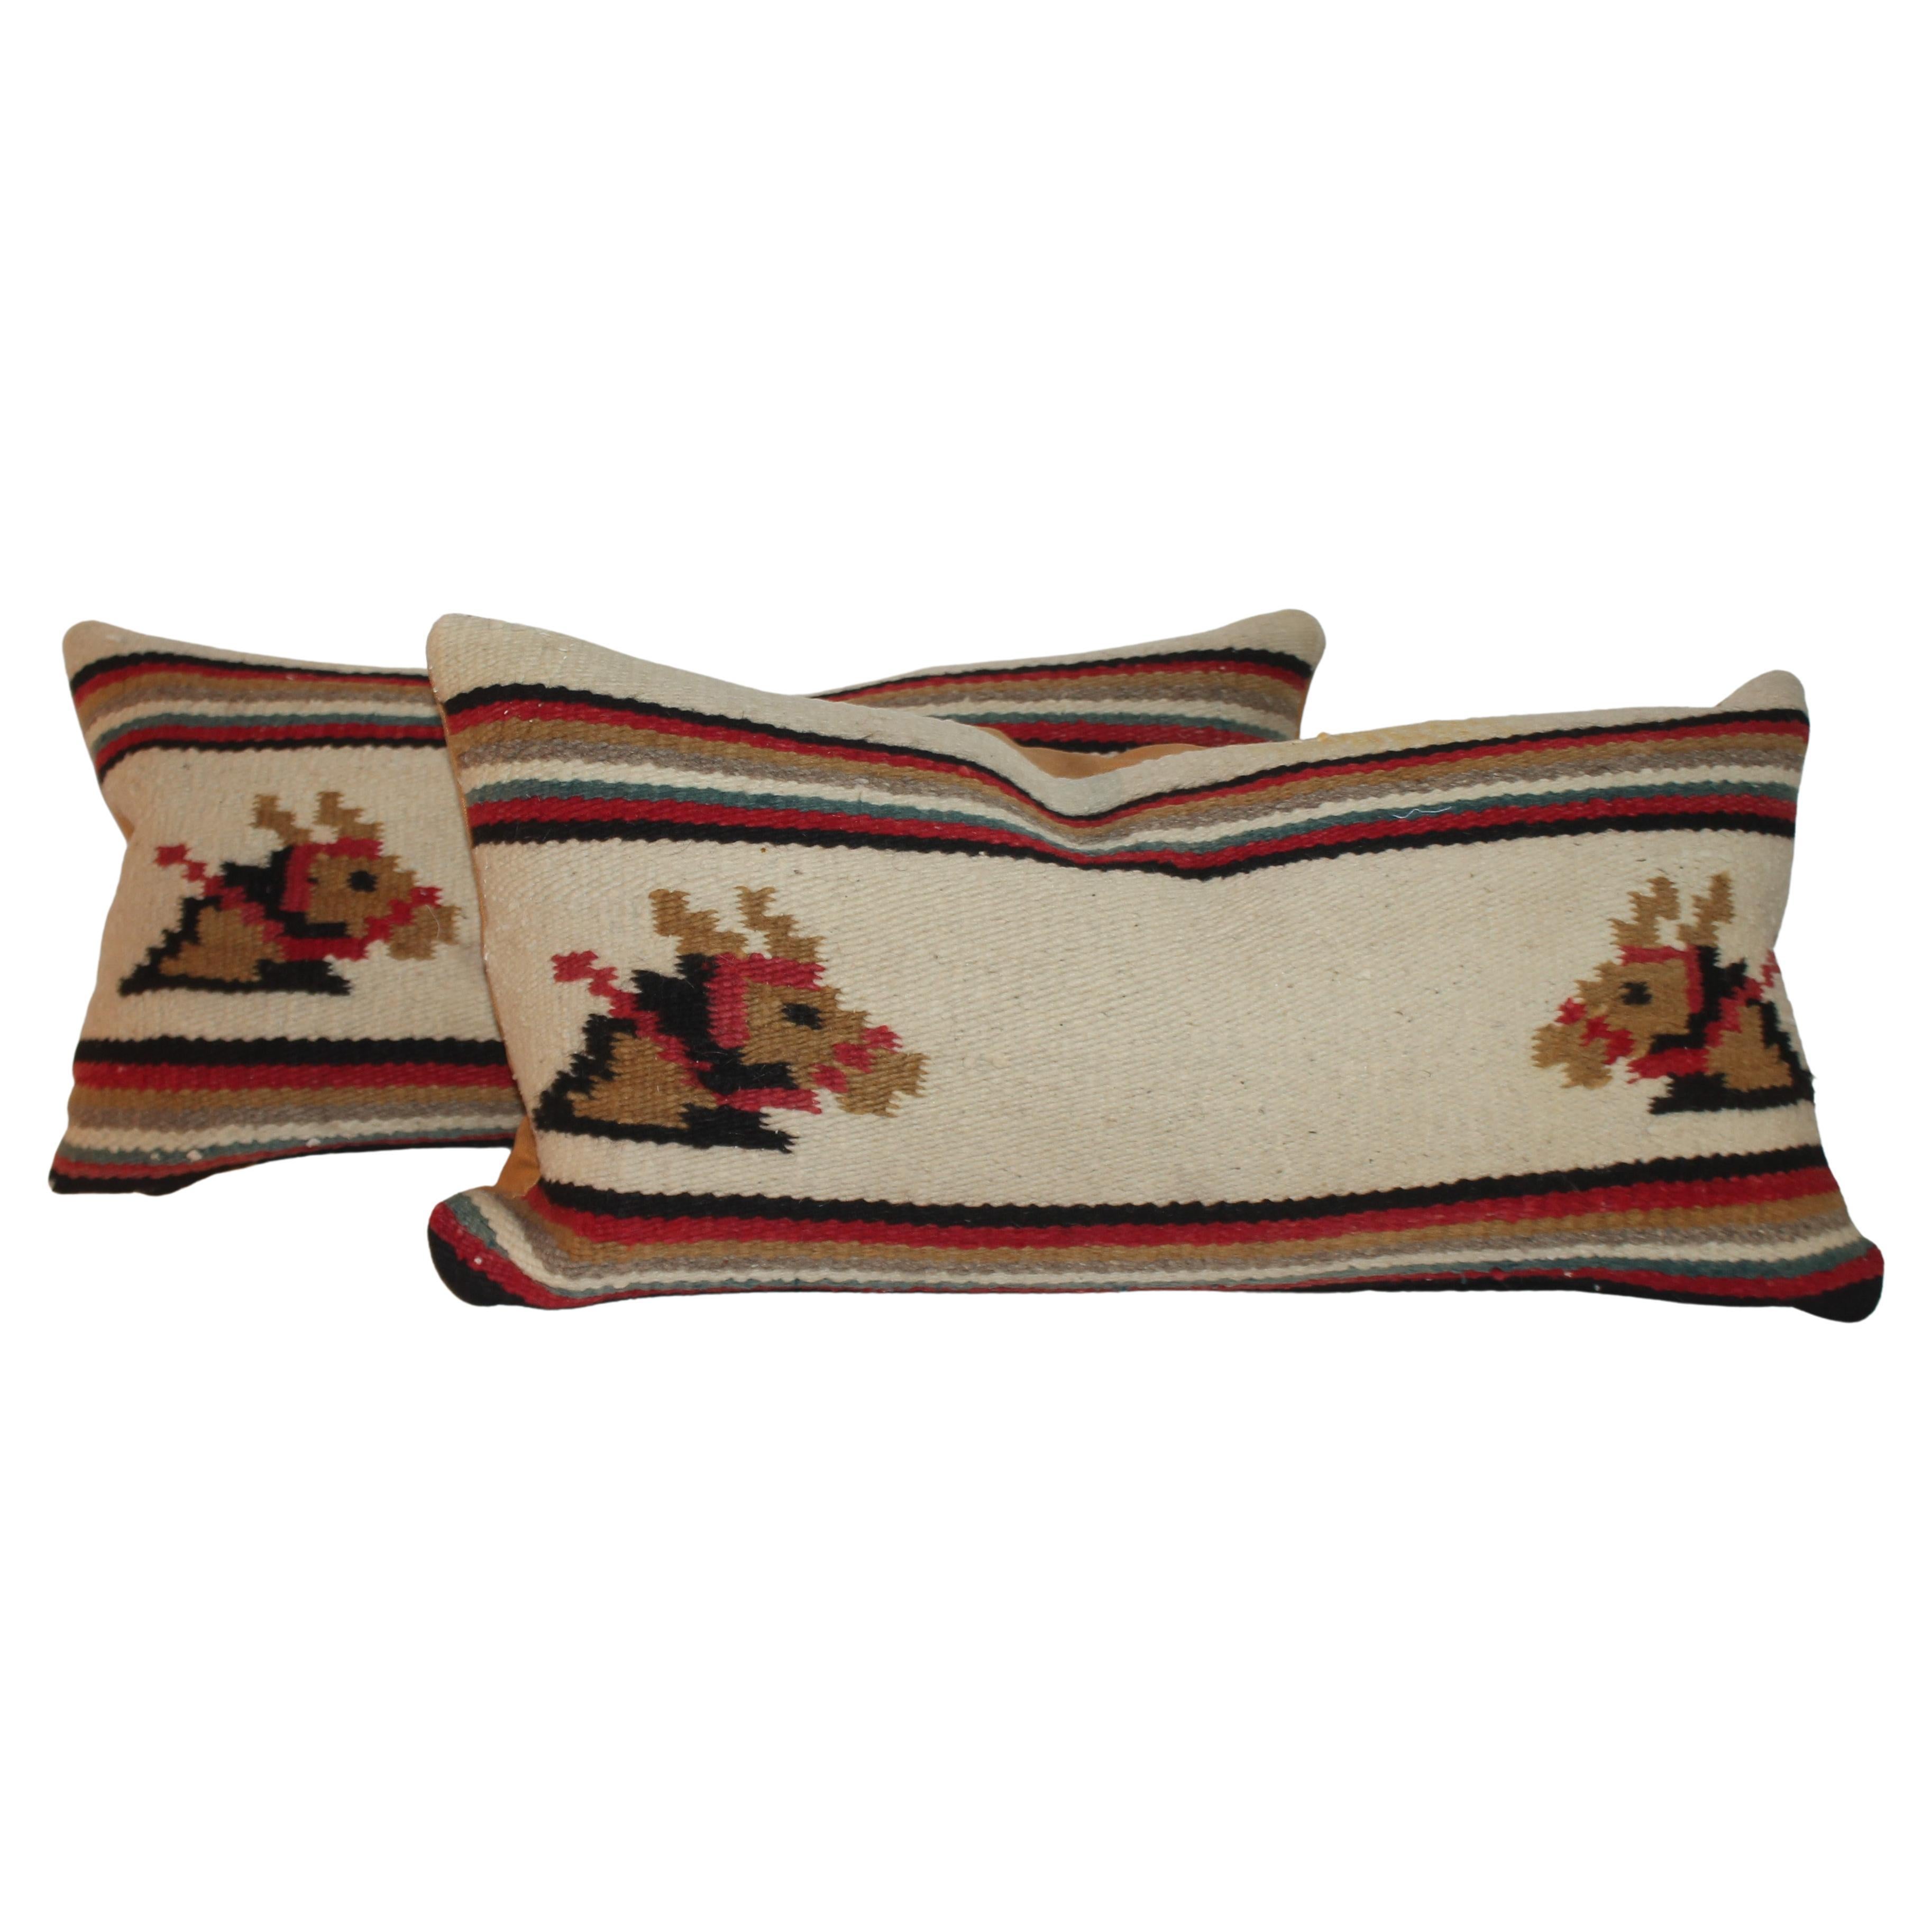 Navajo Indian Weaving with Horses Pillows For Sale